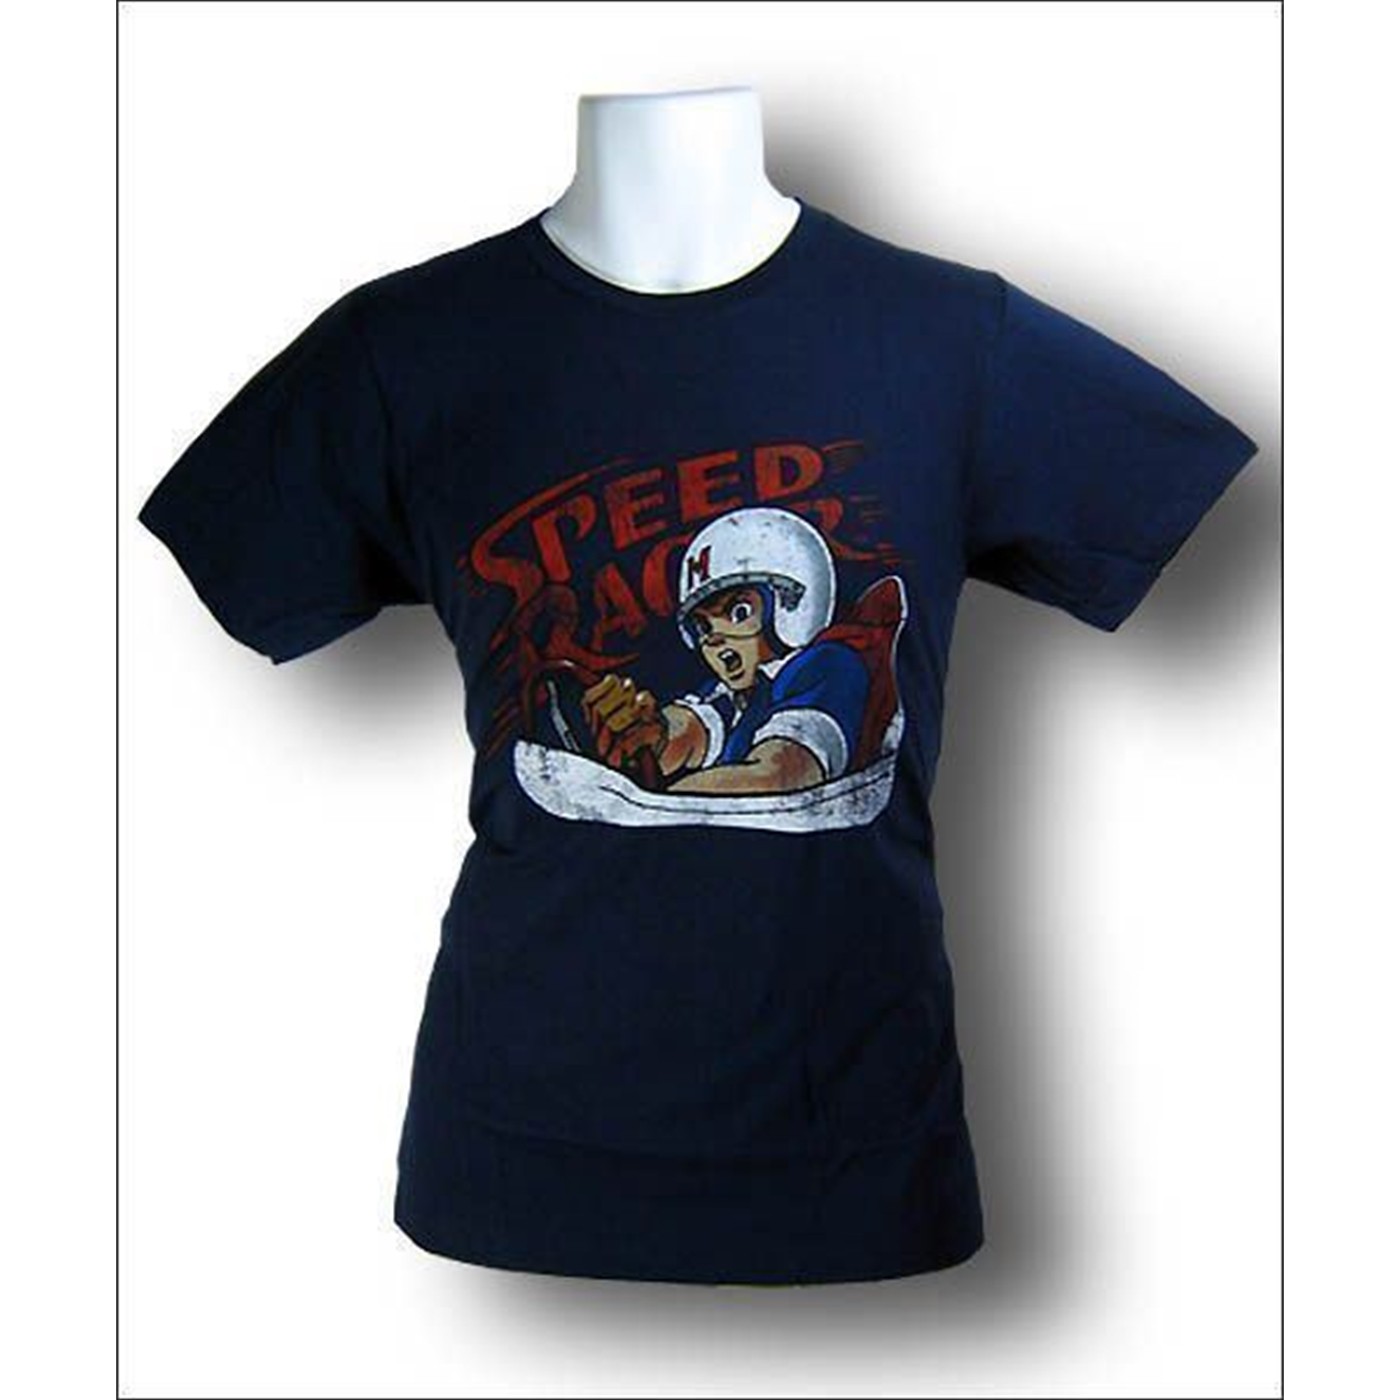 Speed Racer T-Shirt Faster Faster Faster